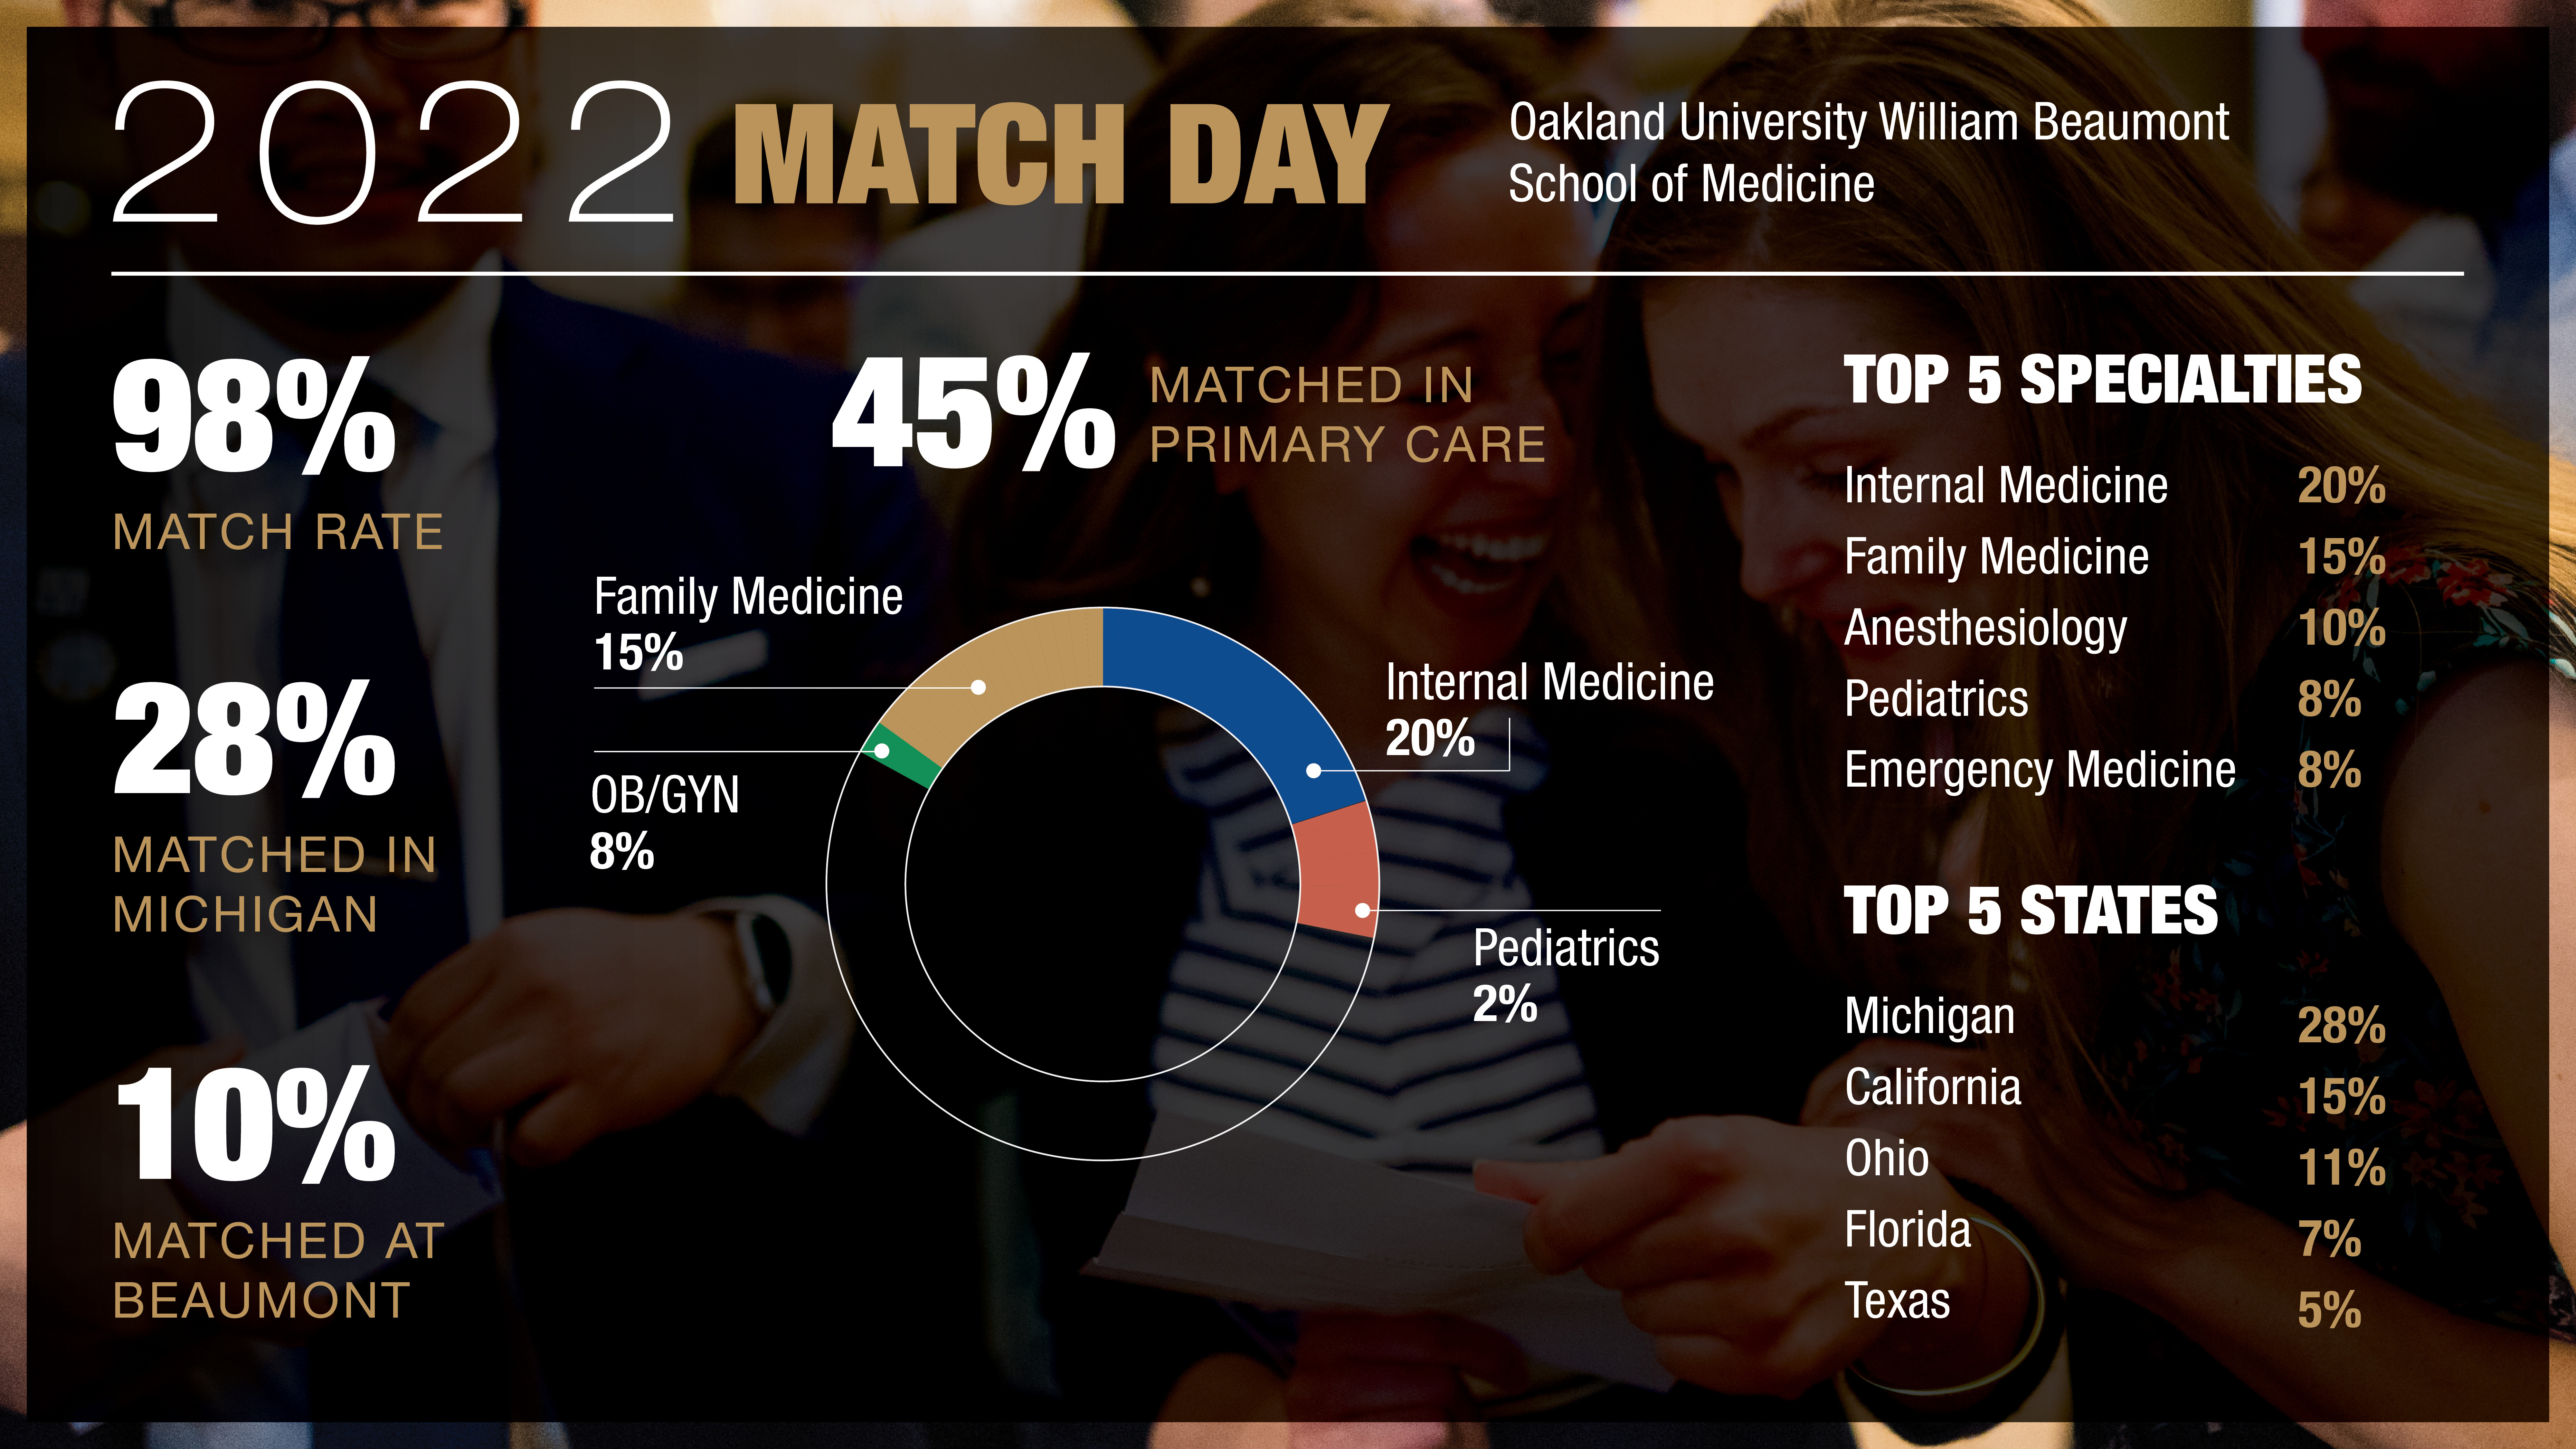 2022 Match Day Infographic